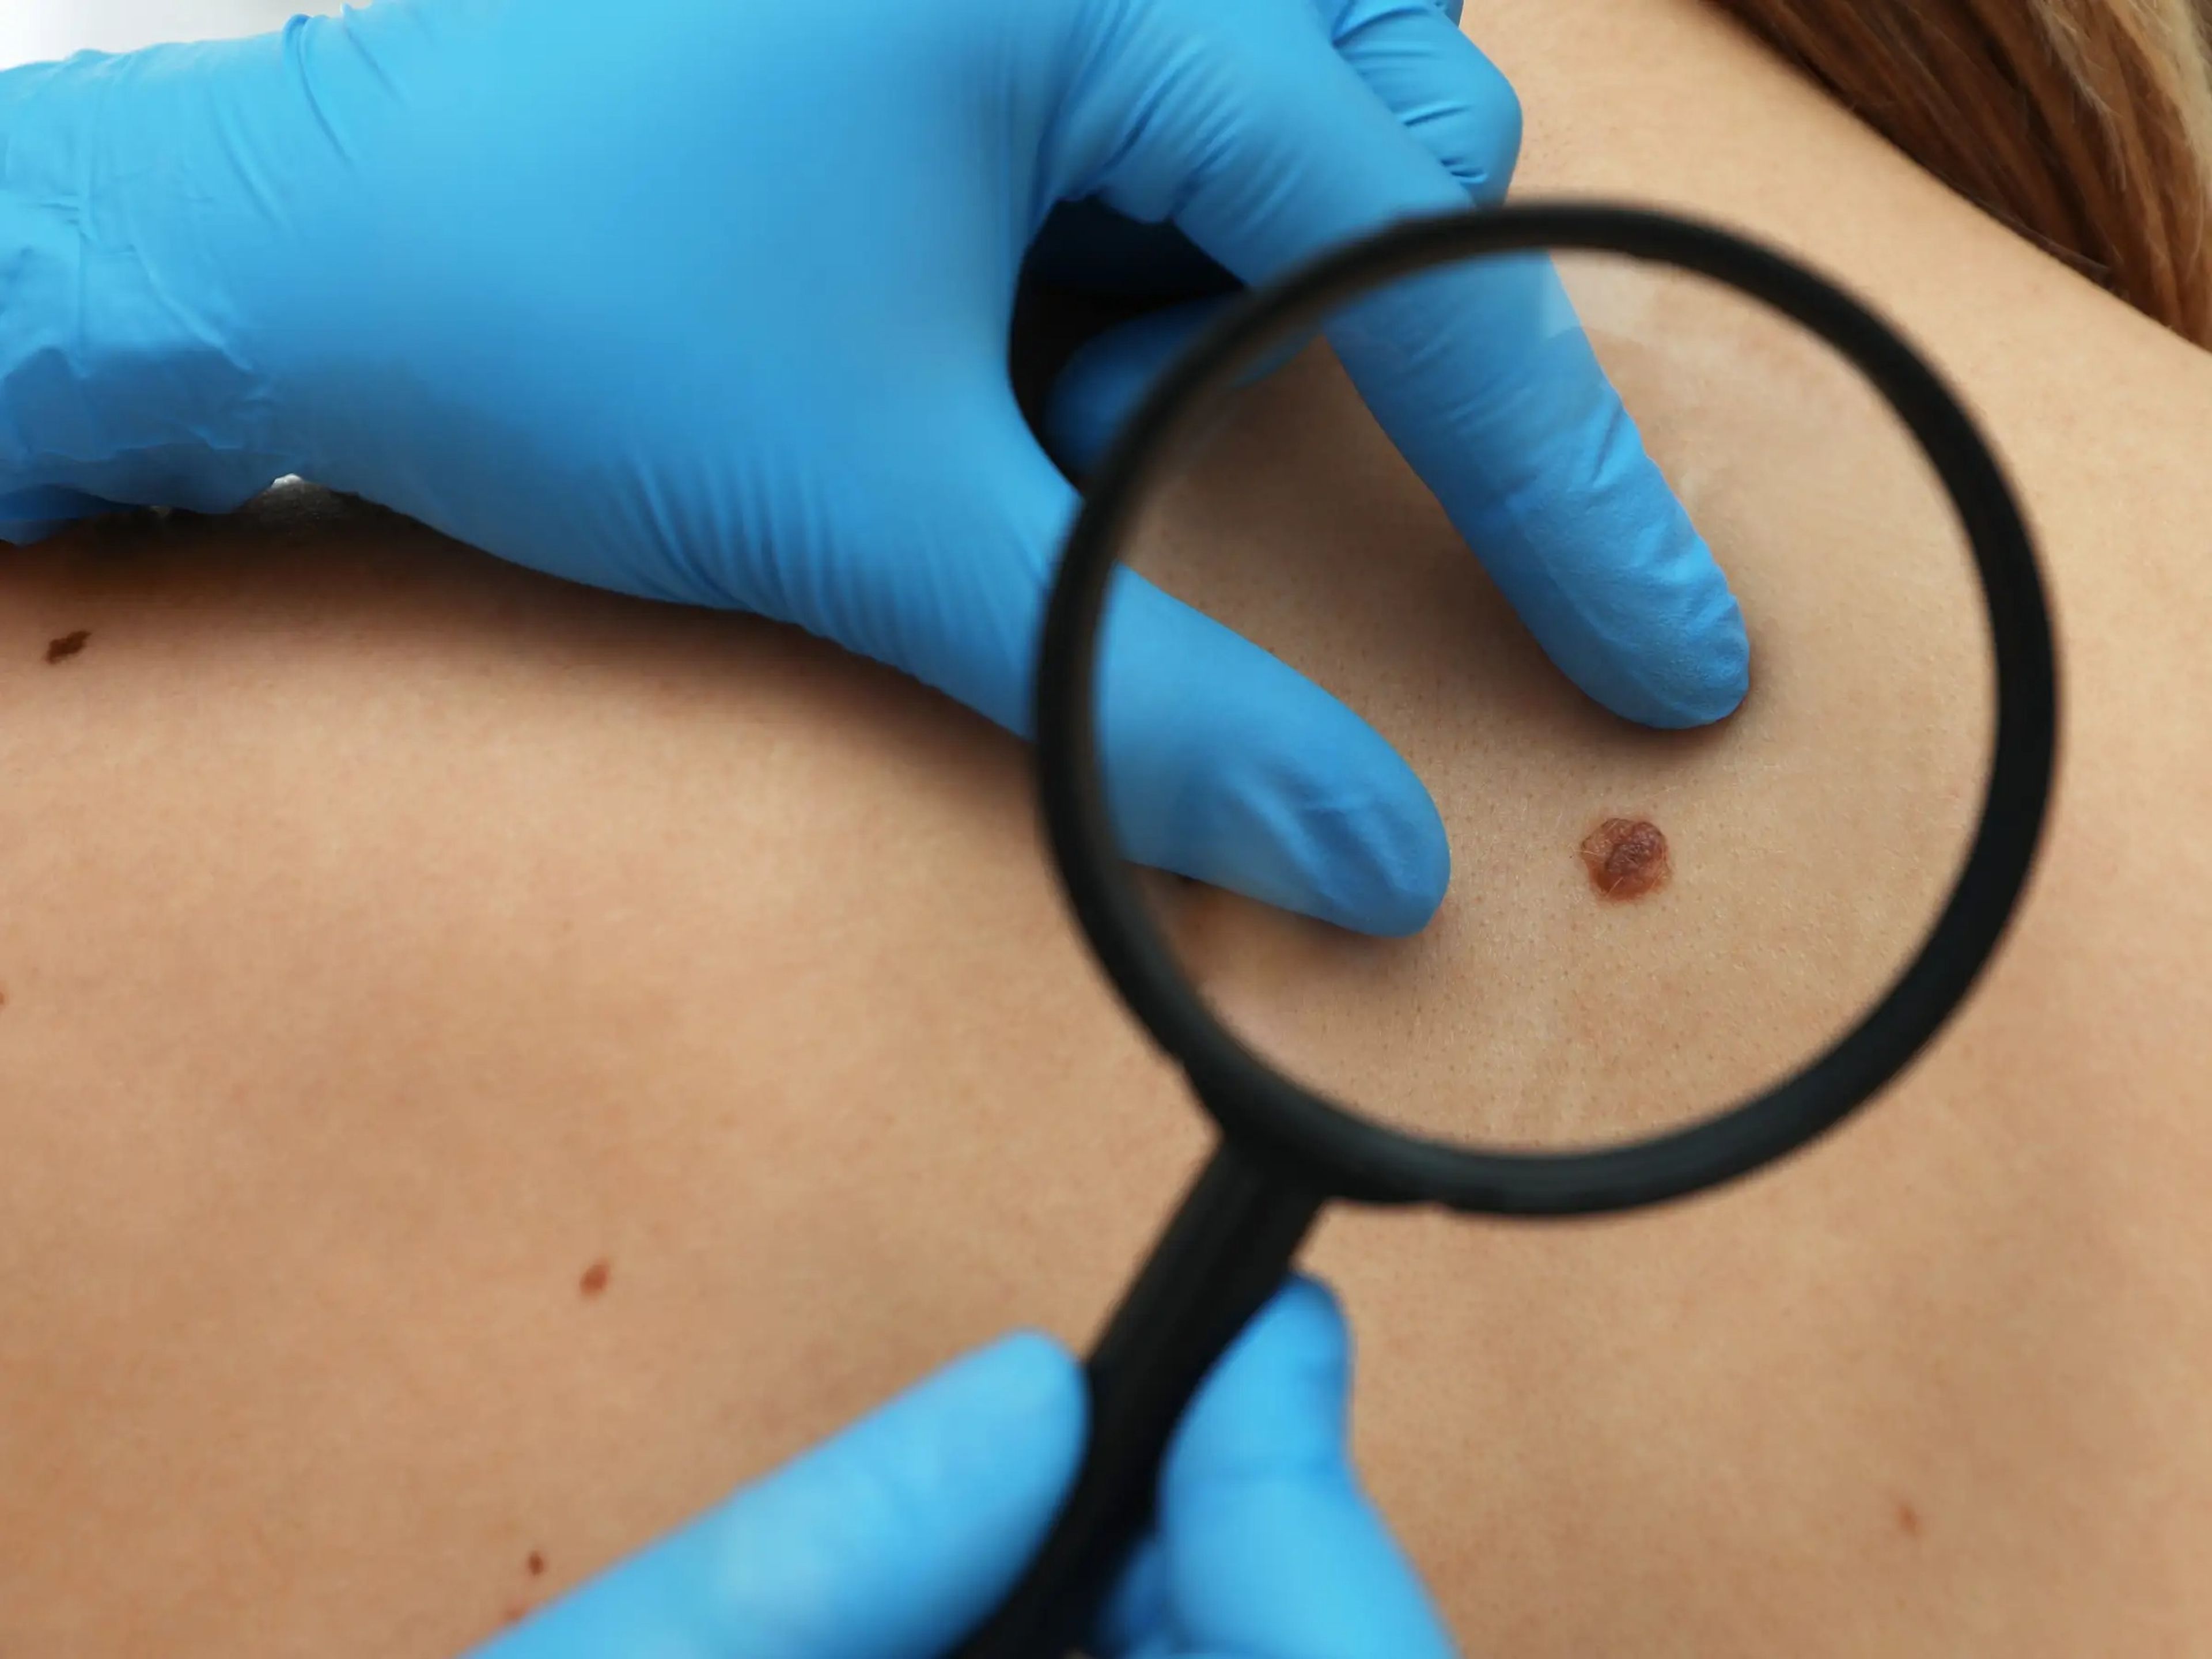 A doctor inspecting a mole for skin cancer